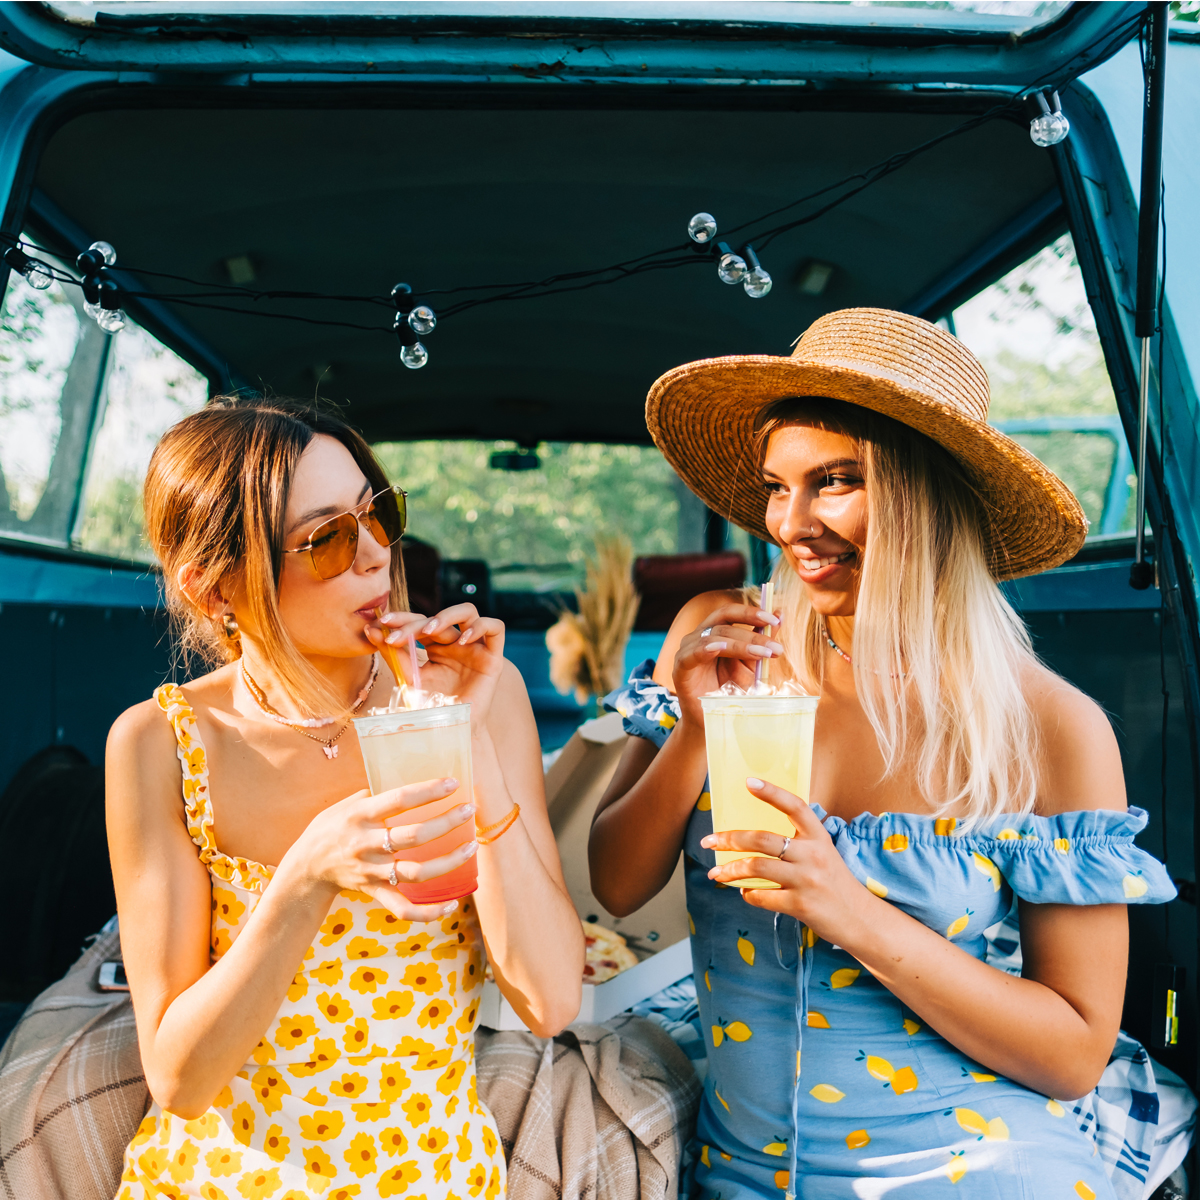 Treat your bestie to one of our New Lemonades, Salted Caramel or Passion Fruit!  ☀️ 🍹 🍩   #Robins #RobinsDonuts #SummerCoolers #PassionFruit #SaltedCaramel #Lemonade #Coffee #Summer2023